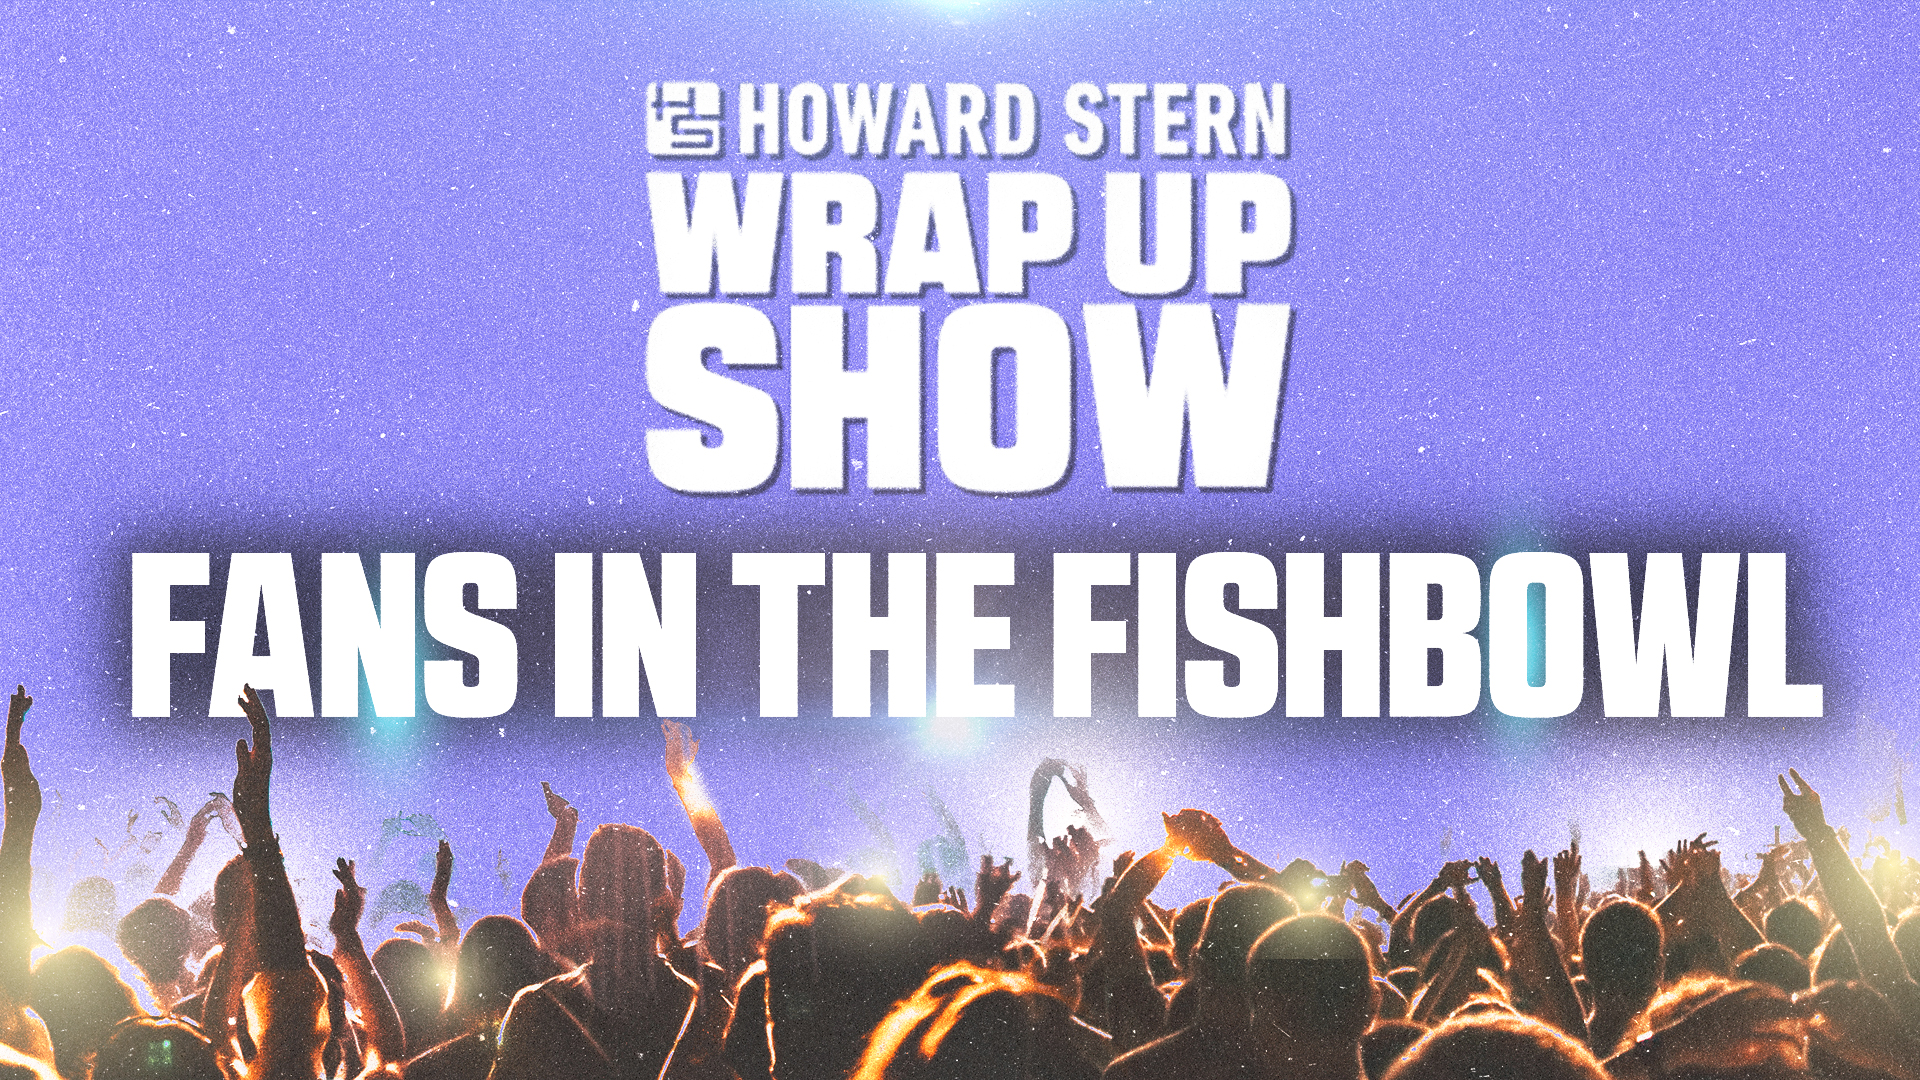 Howard Stern, Wrap Up Show, Fans in the Fishbowl